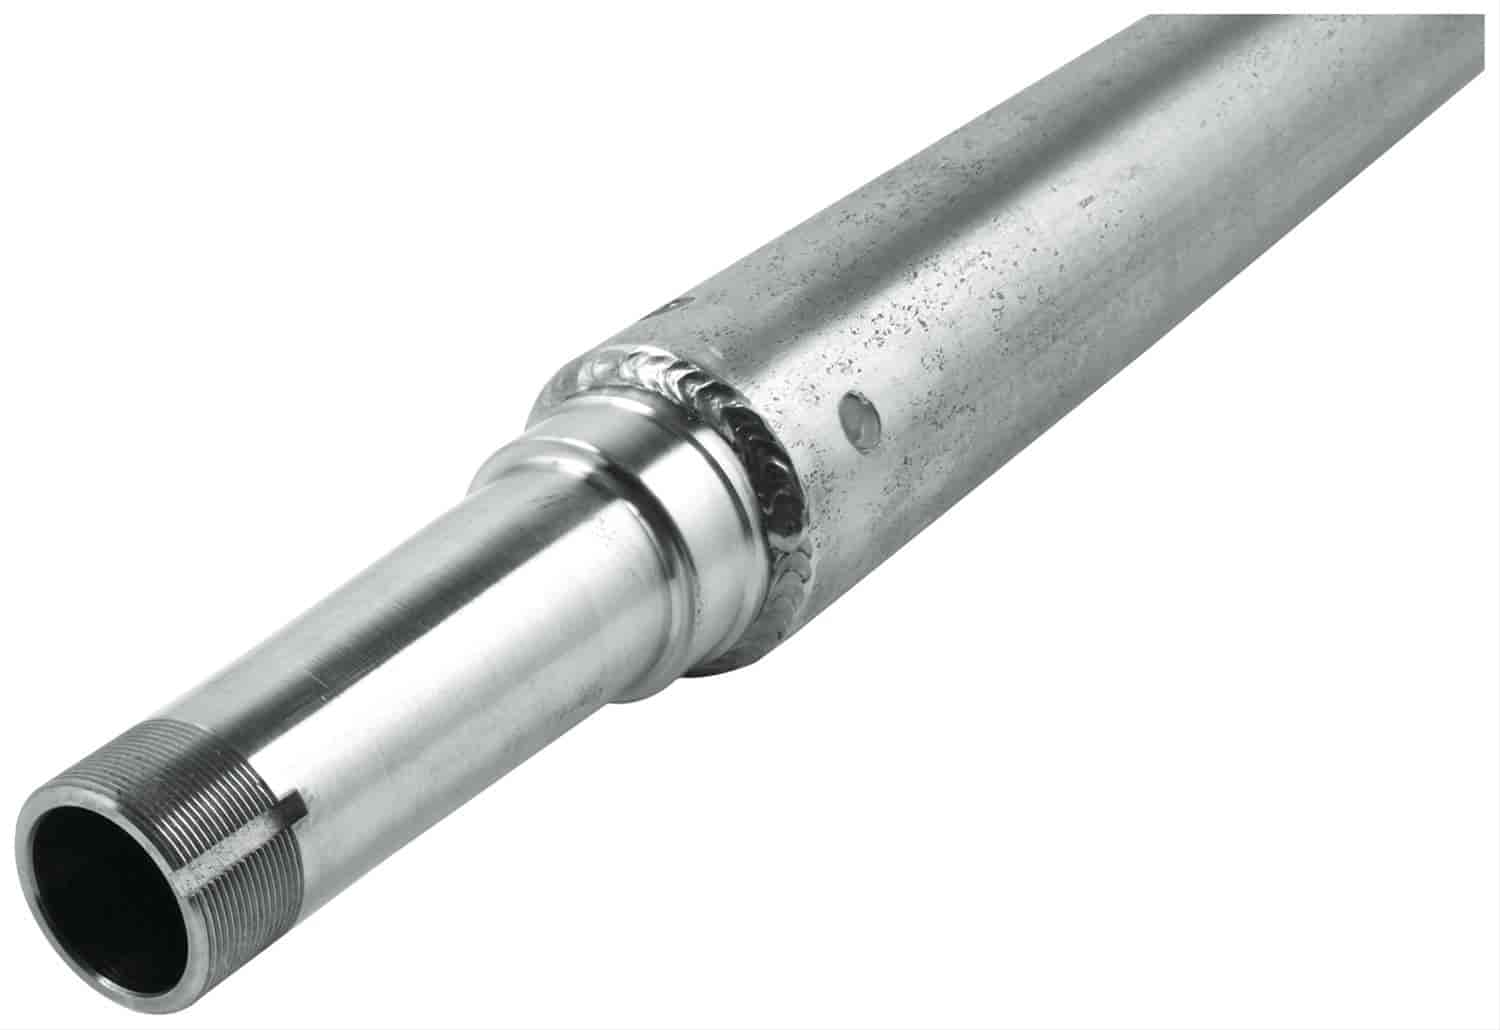 Wide 5 Steel Axle Tube Overall Tube Length: 32-1/2"